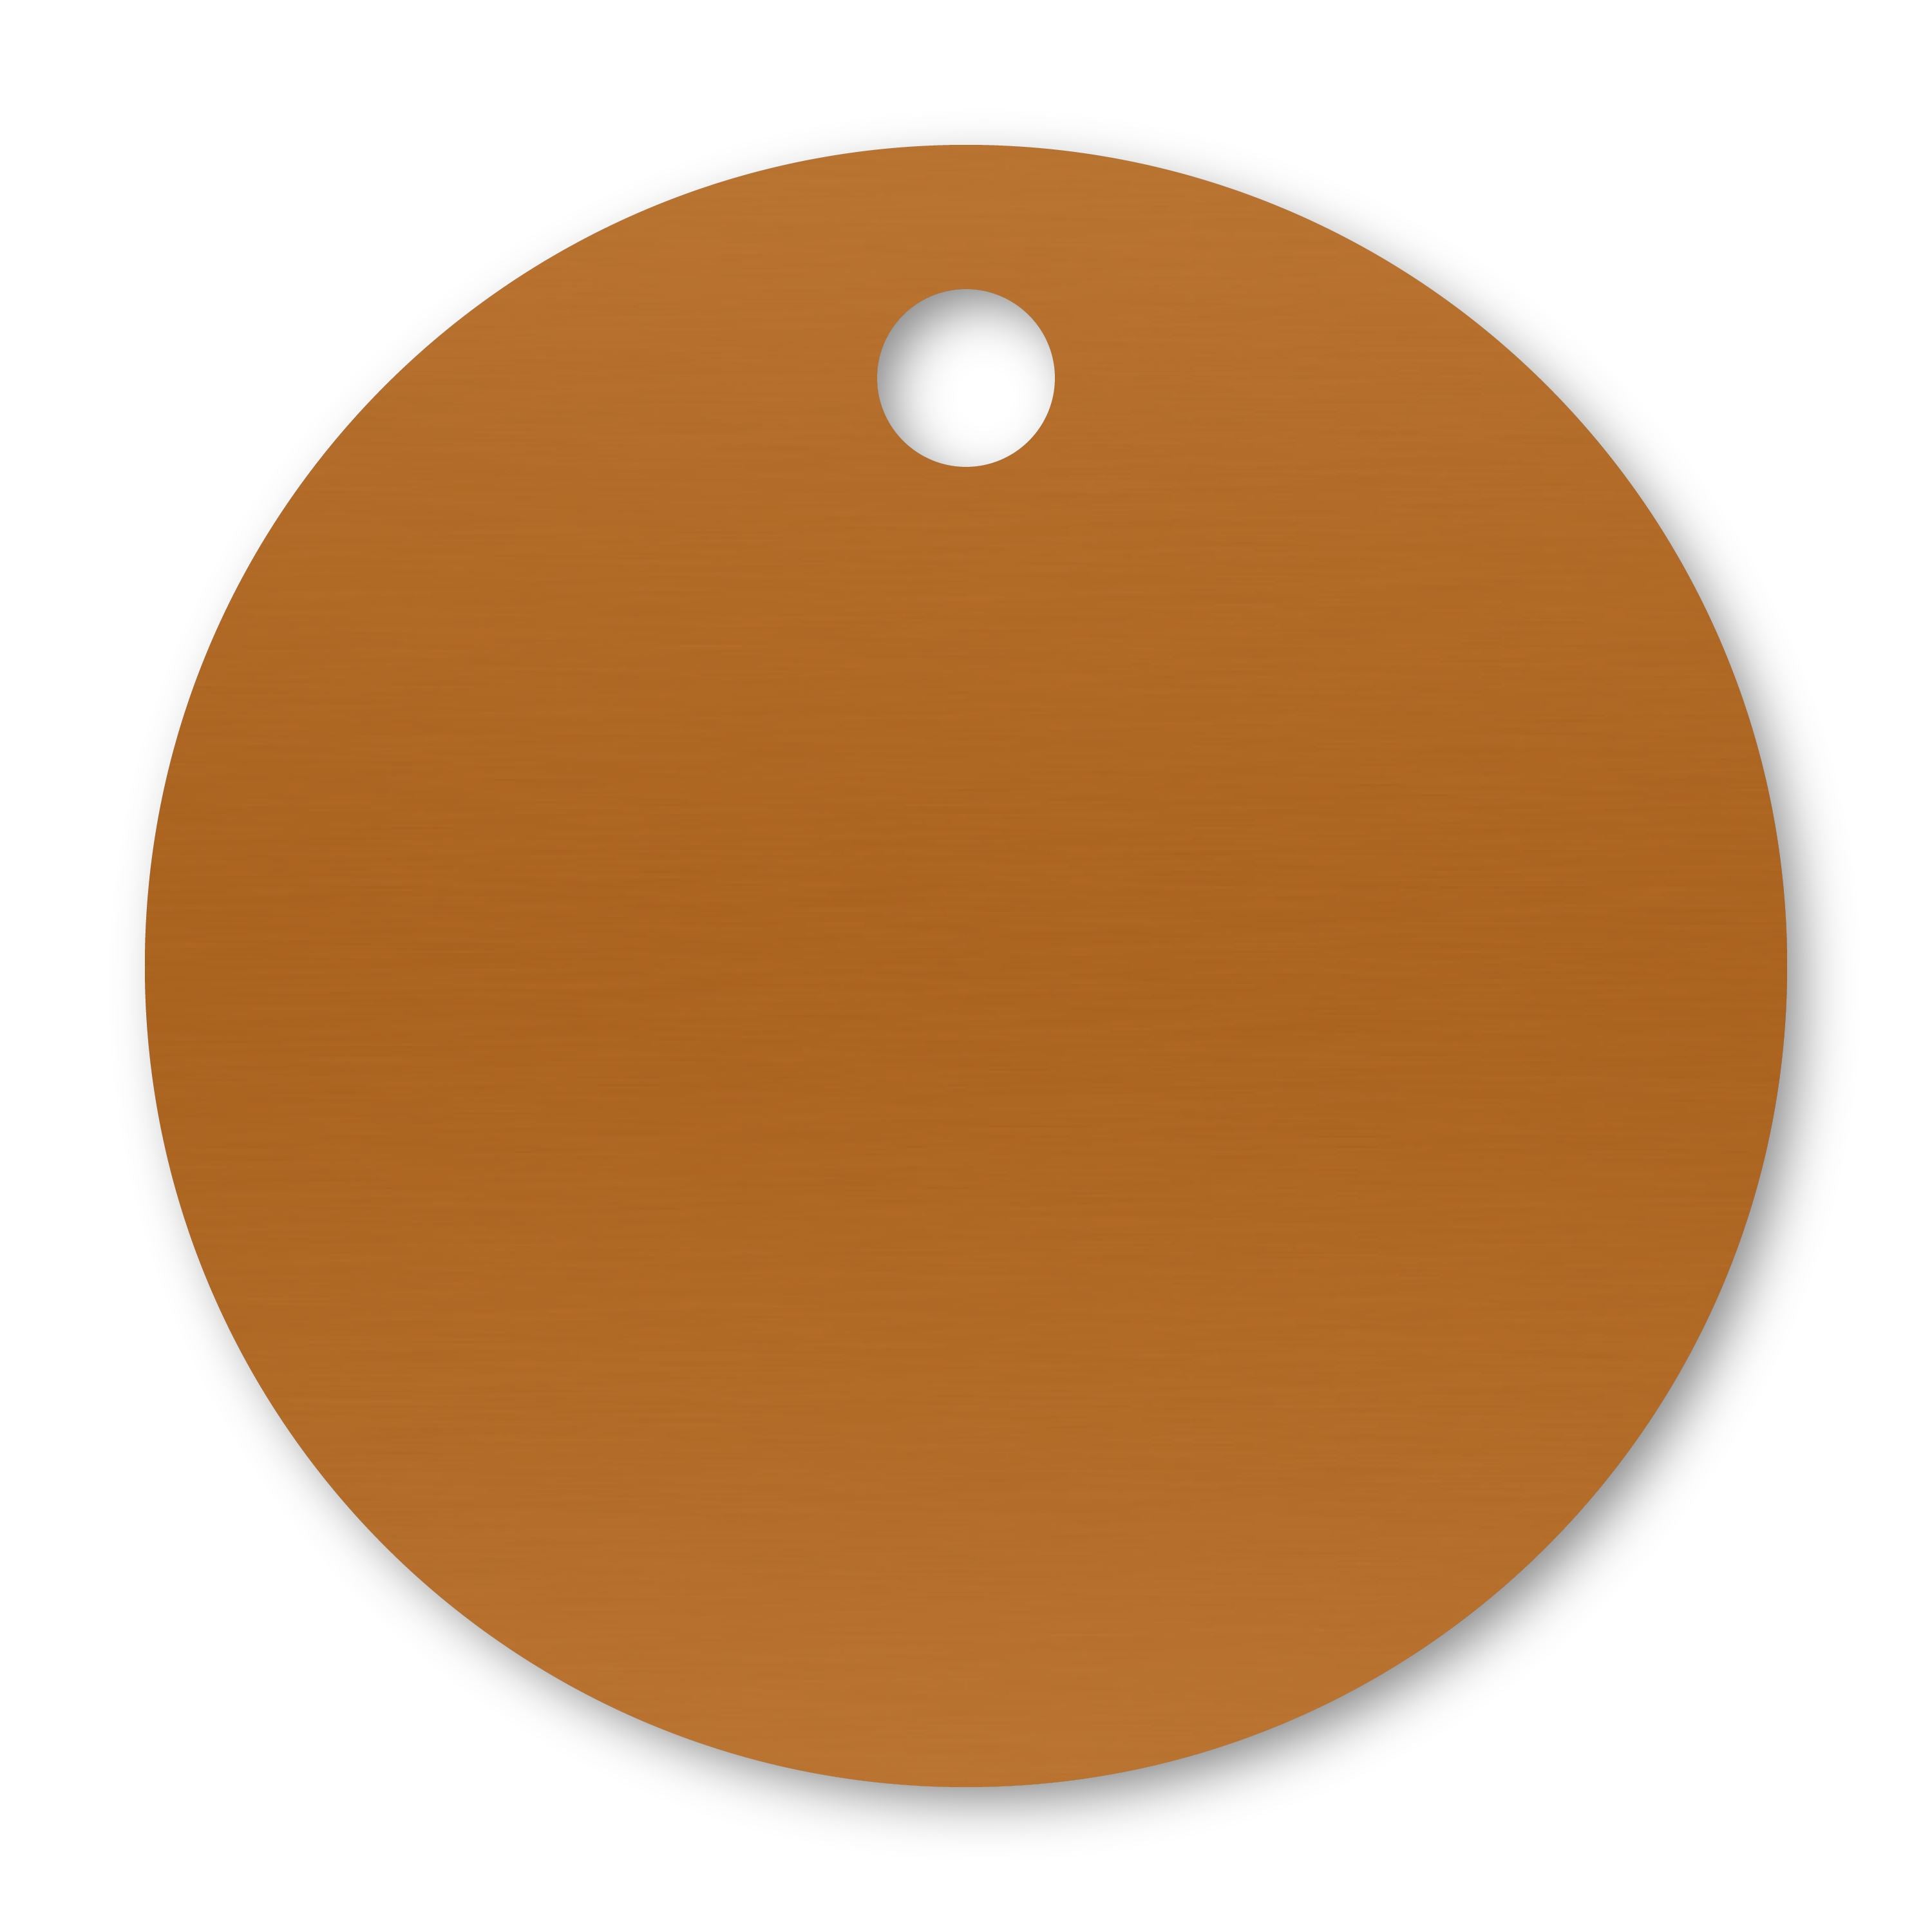 Anodized Aluminum Round Tags, 7/8" with 3/32" Hole, Laser Engraved Metal Tags Craftworks NW Orange 